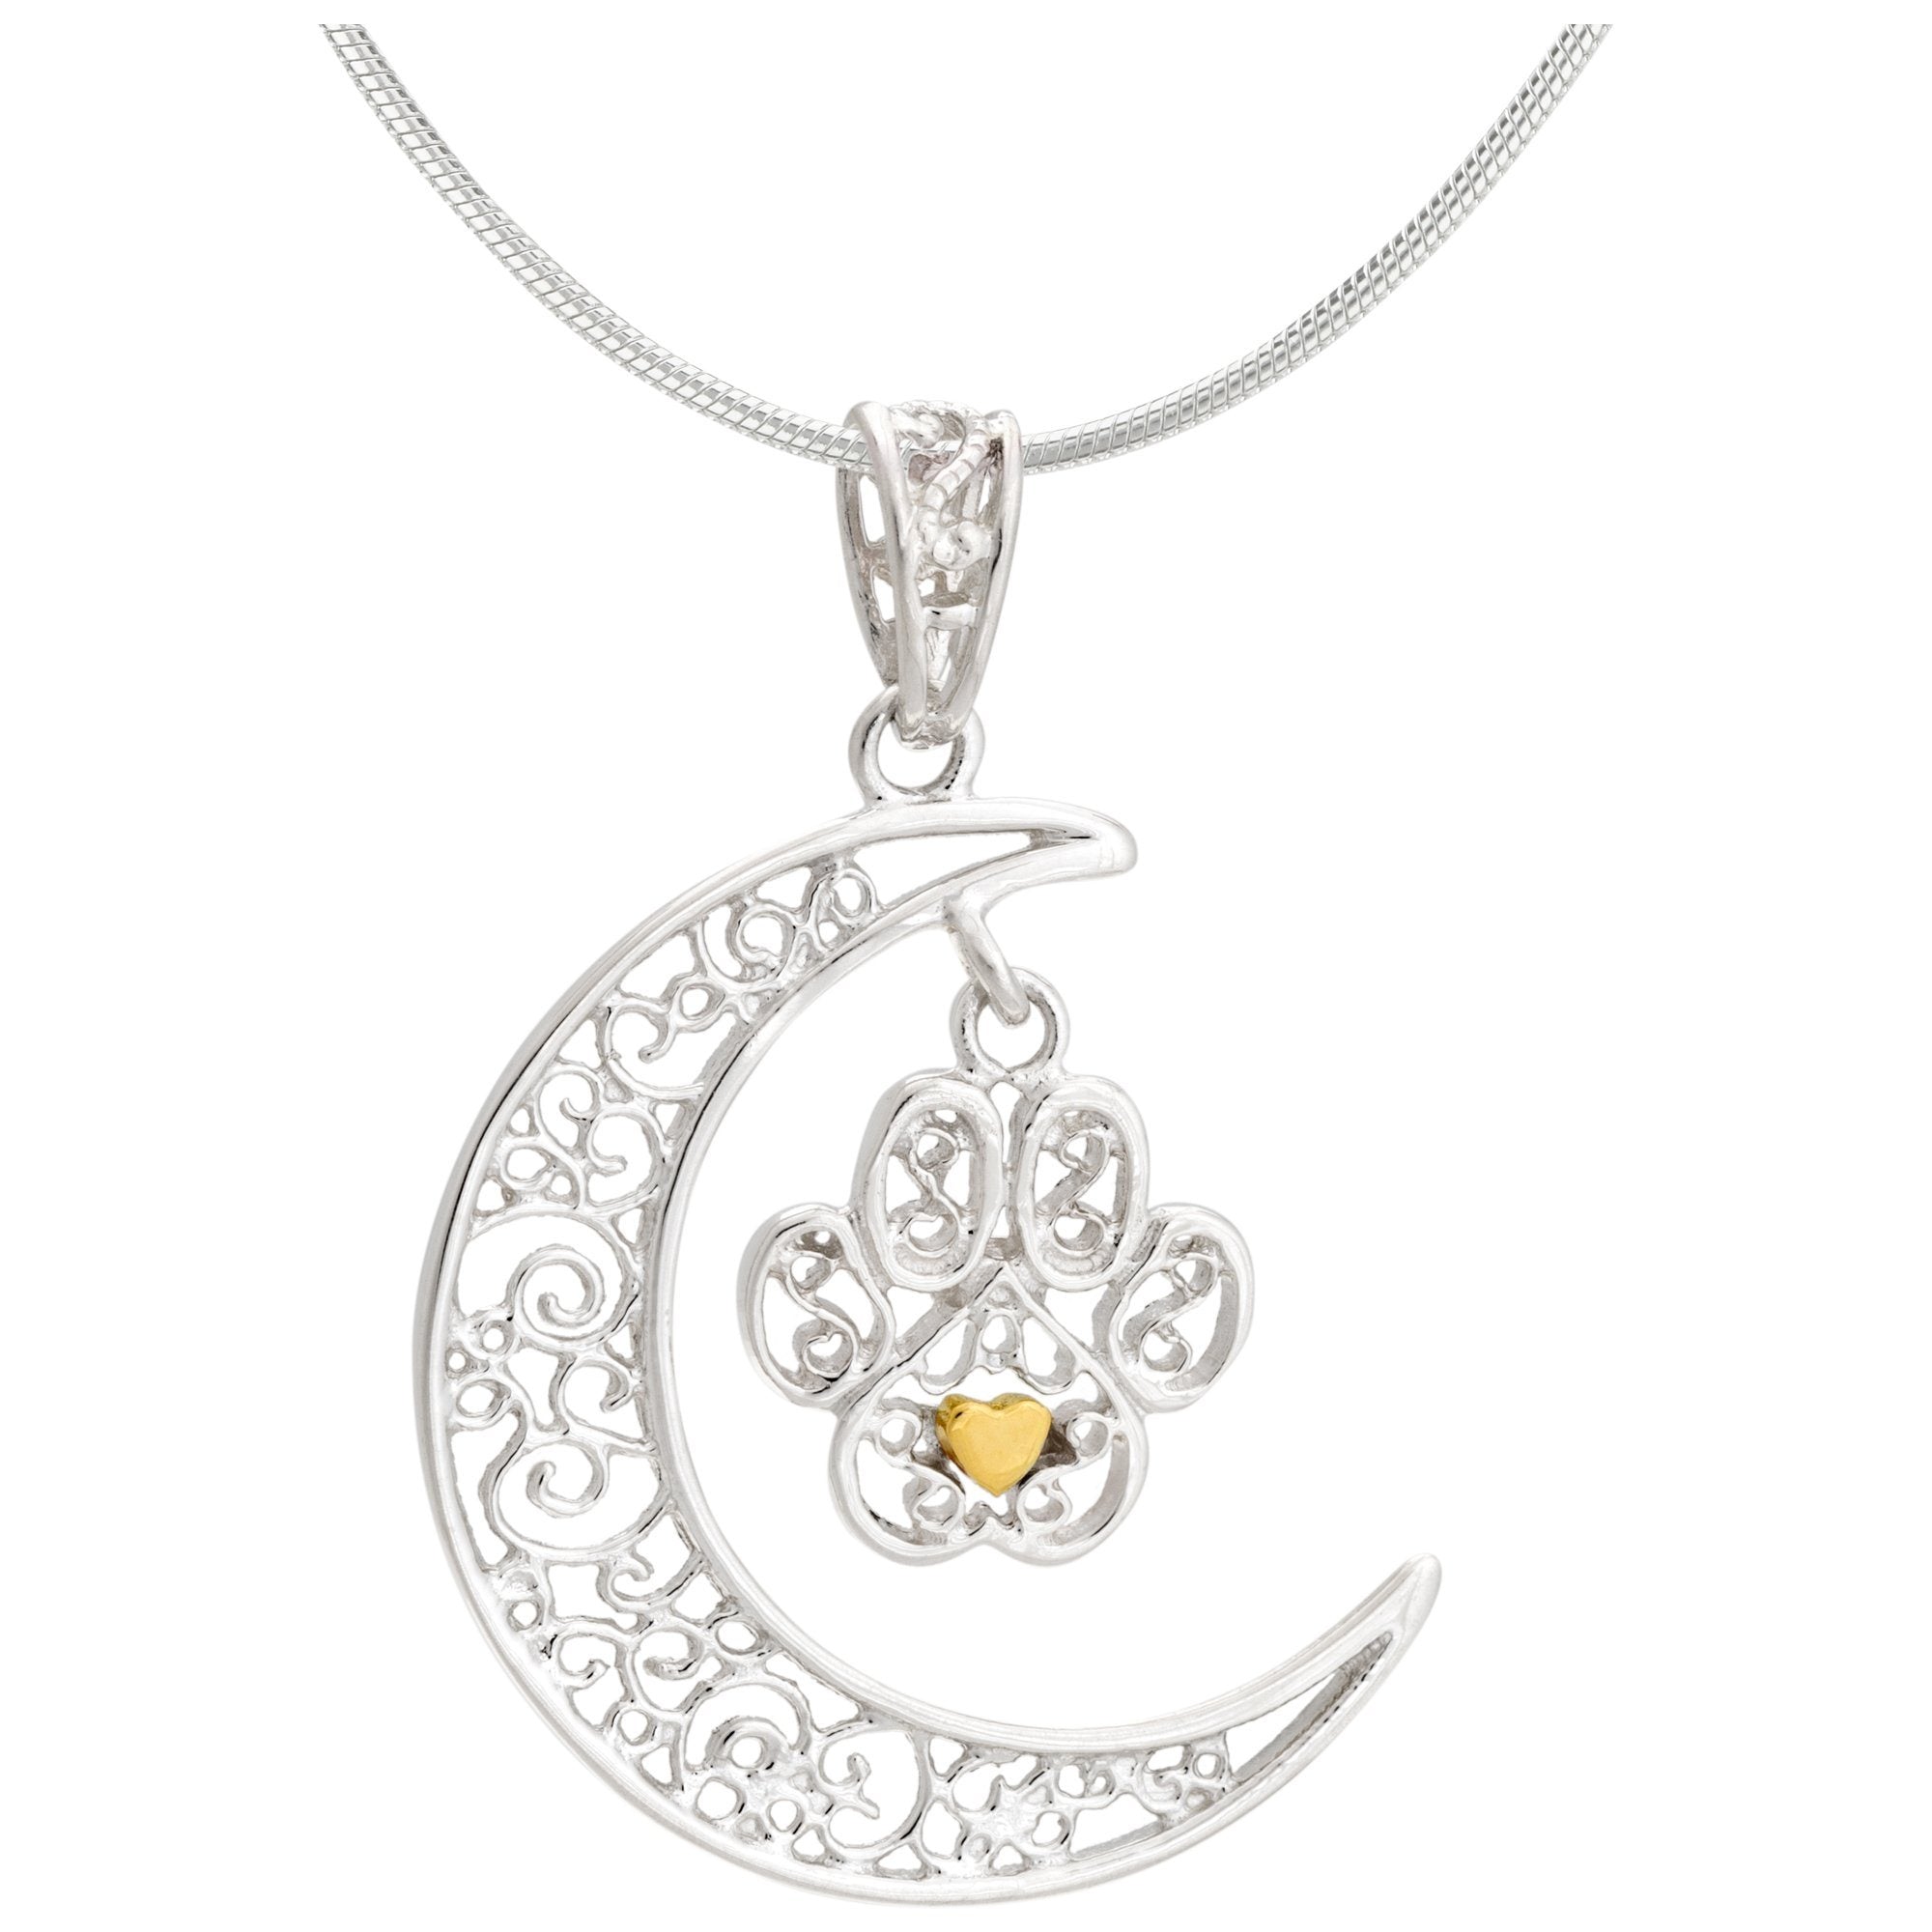 Filigree Moonlight Paw Sterling Necklace - Pendant Only